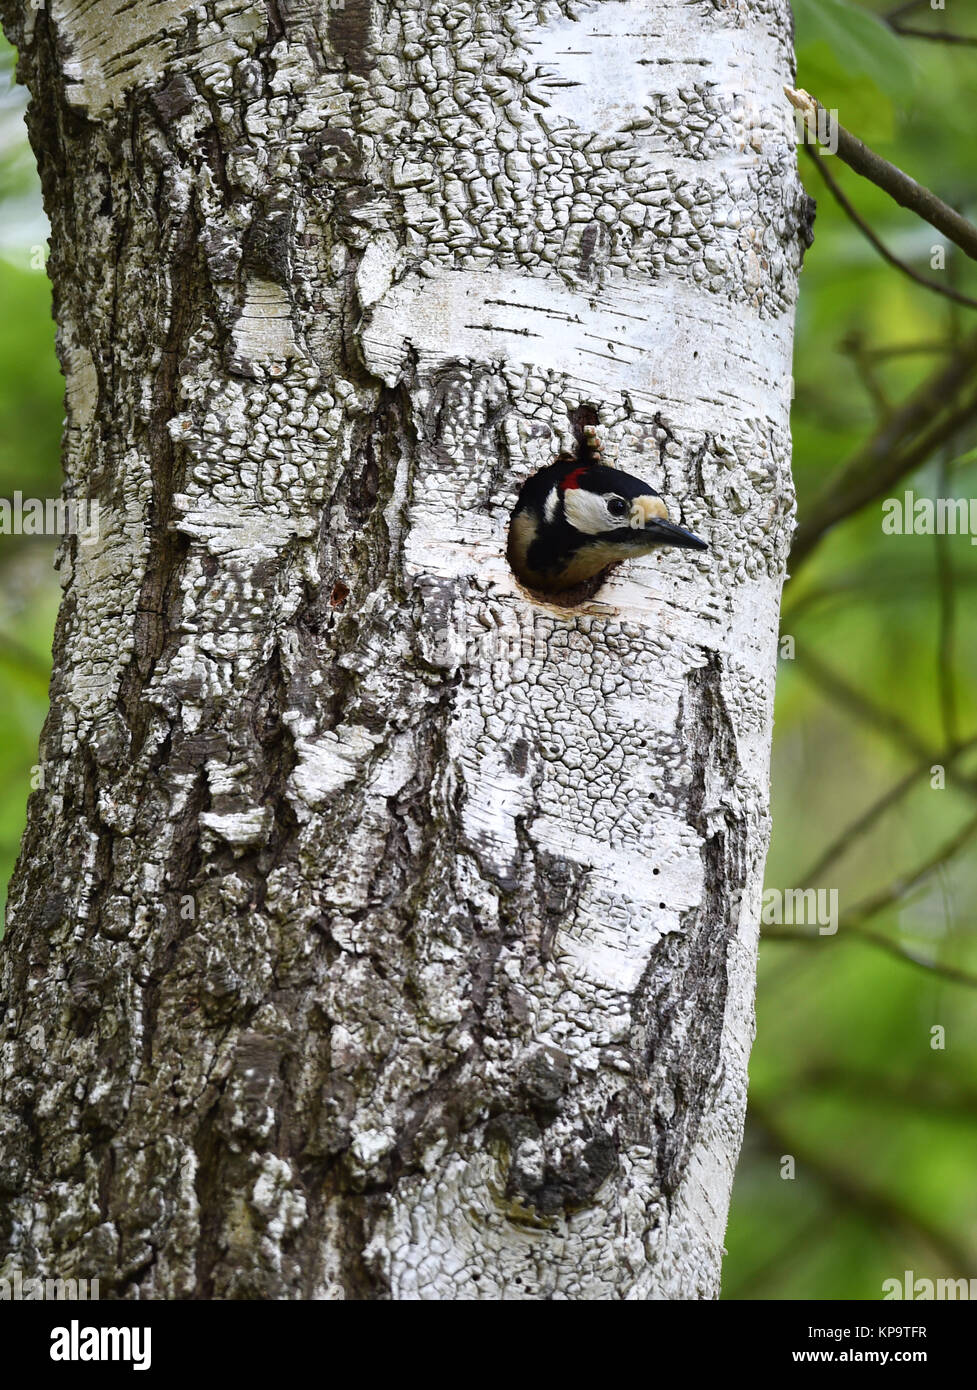 Colorful woodpecker in tree cavity Stock Photo